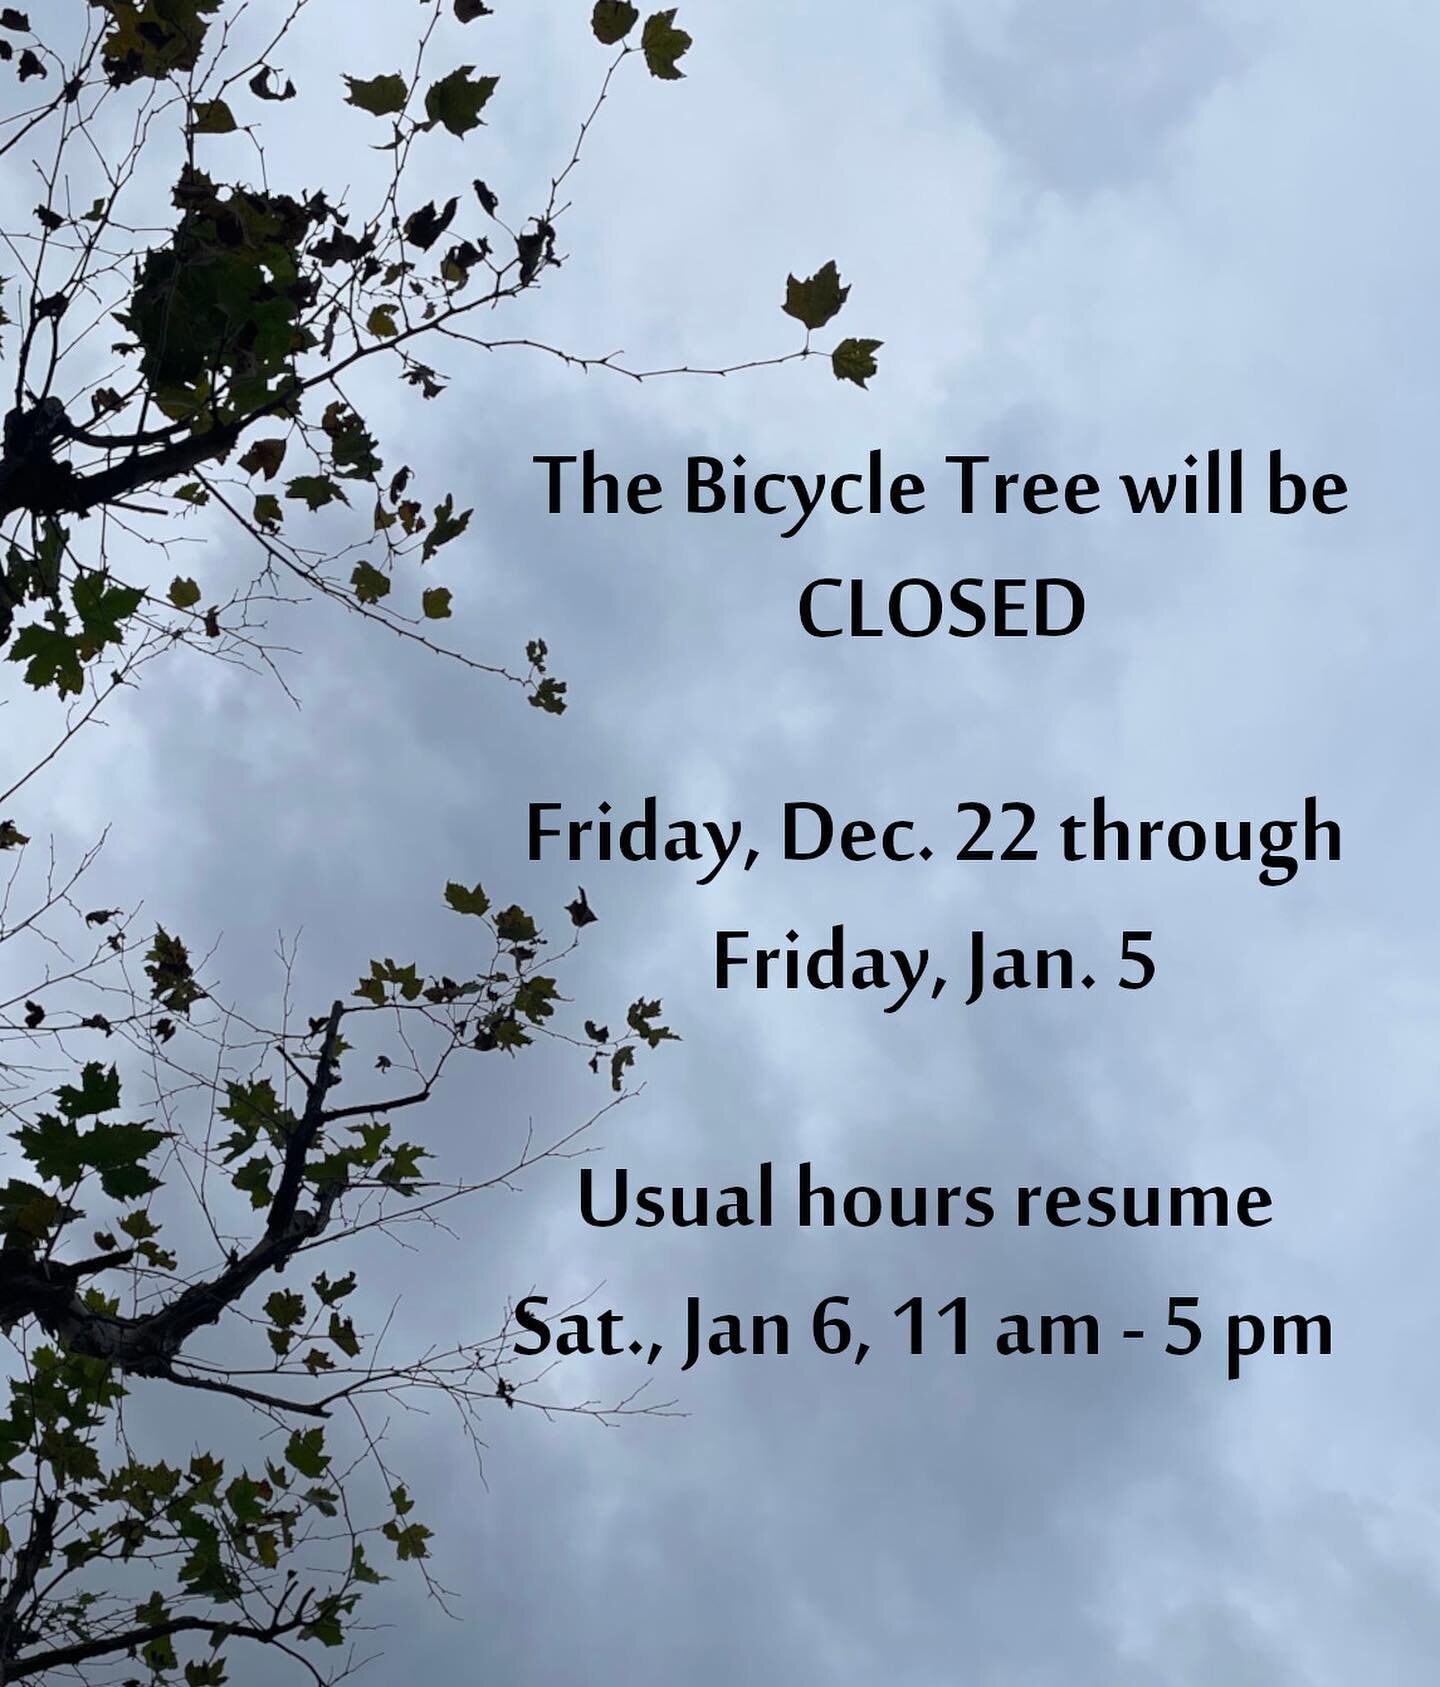 After we finish up for today, the Bicycle Tree will be closed for a winter break from Friday, Dec. 22nd through Friday, Jan. 5th. We&rsquo;ll resume regular hours on Saturday, Jan. 6th, 11 am - 5 pm.

*****

Despu&eacute;s de que terminemos por hoy, 